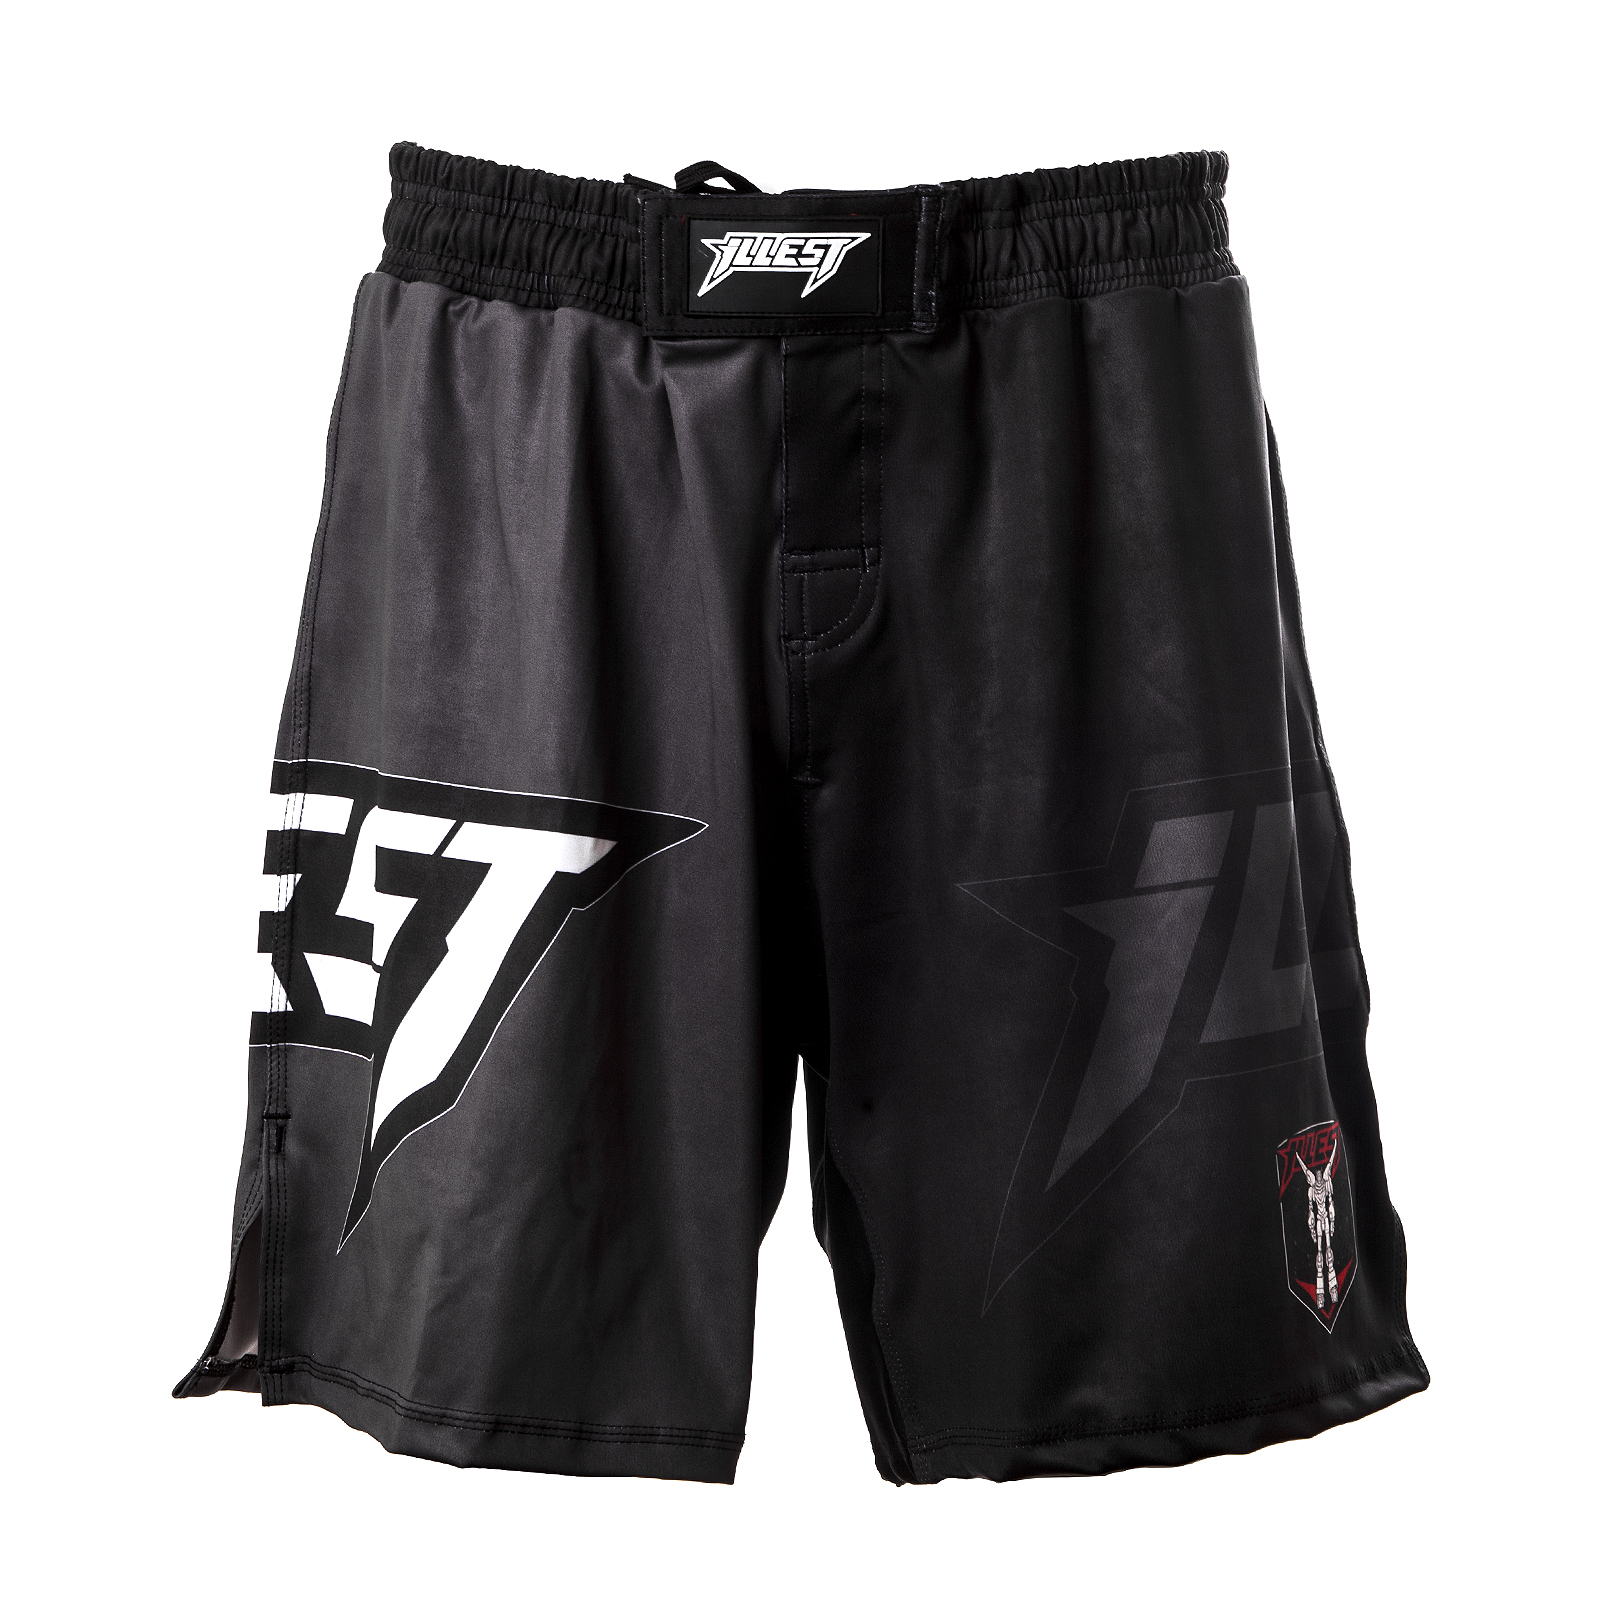 ILLEST Voltron shorts featuring ILLEST logo printed graphics on the side leg